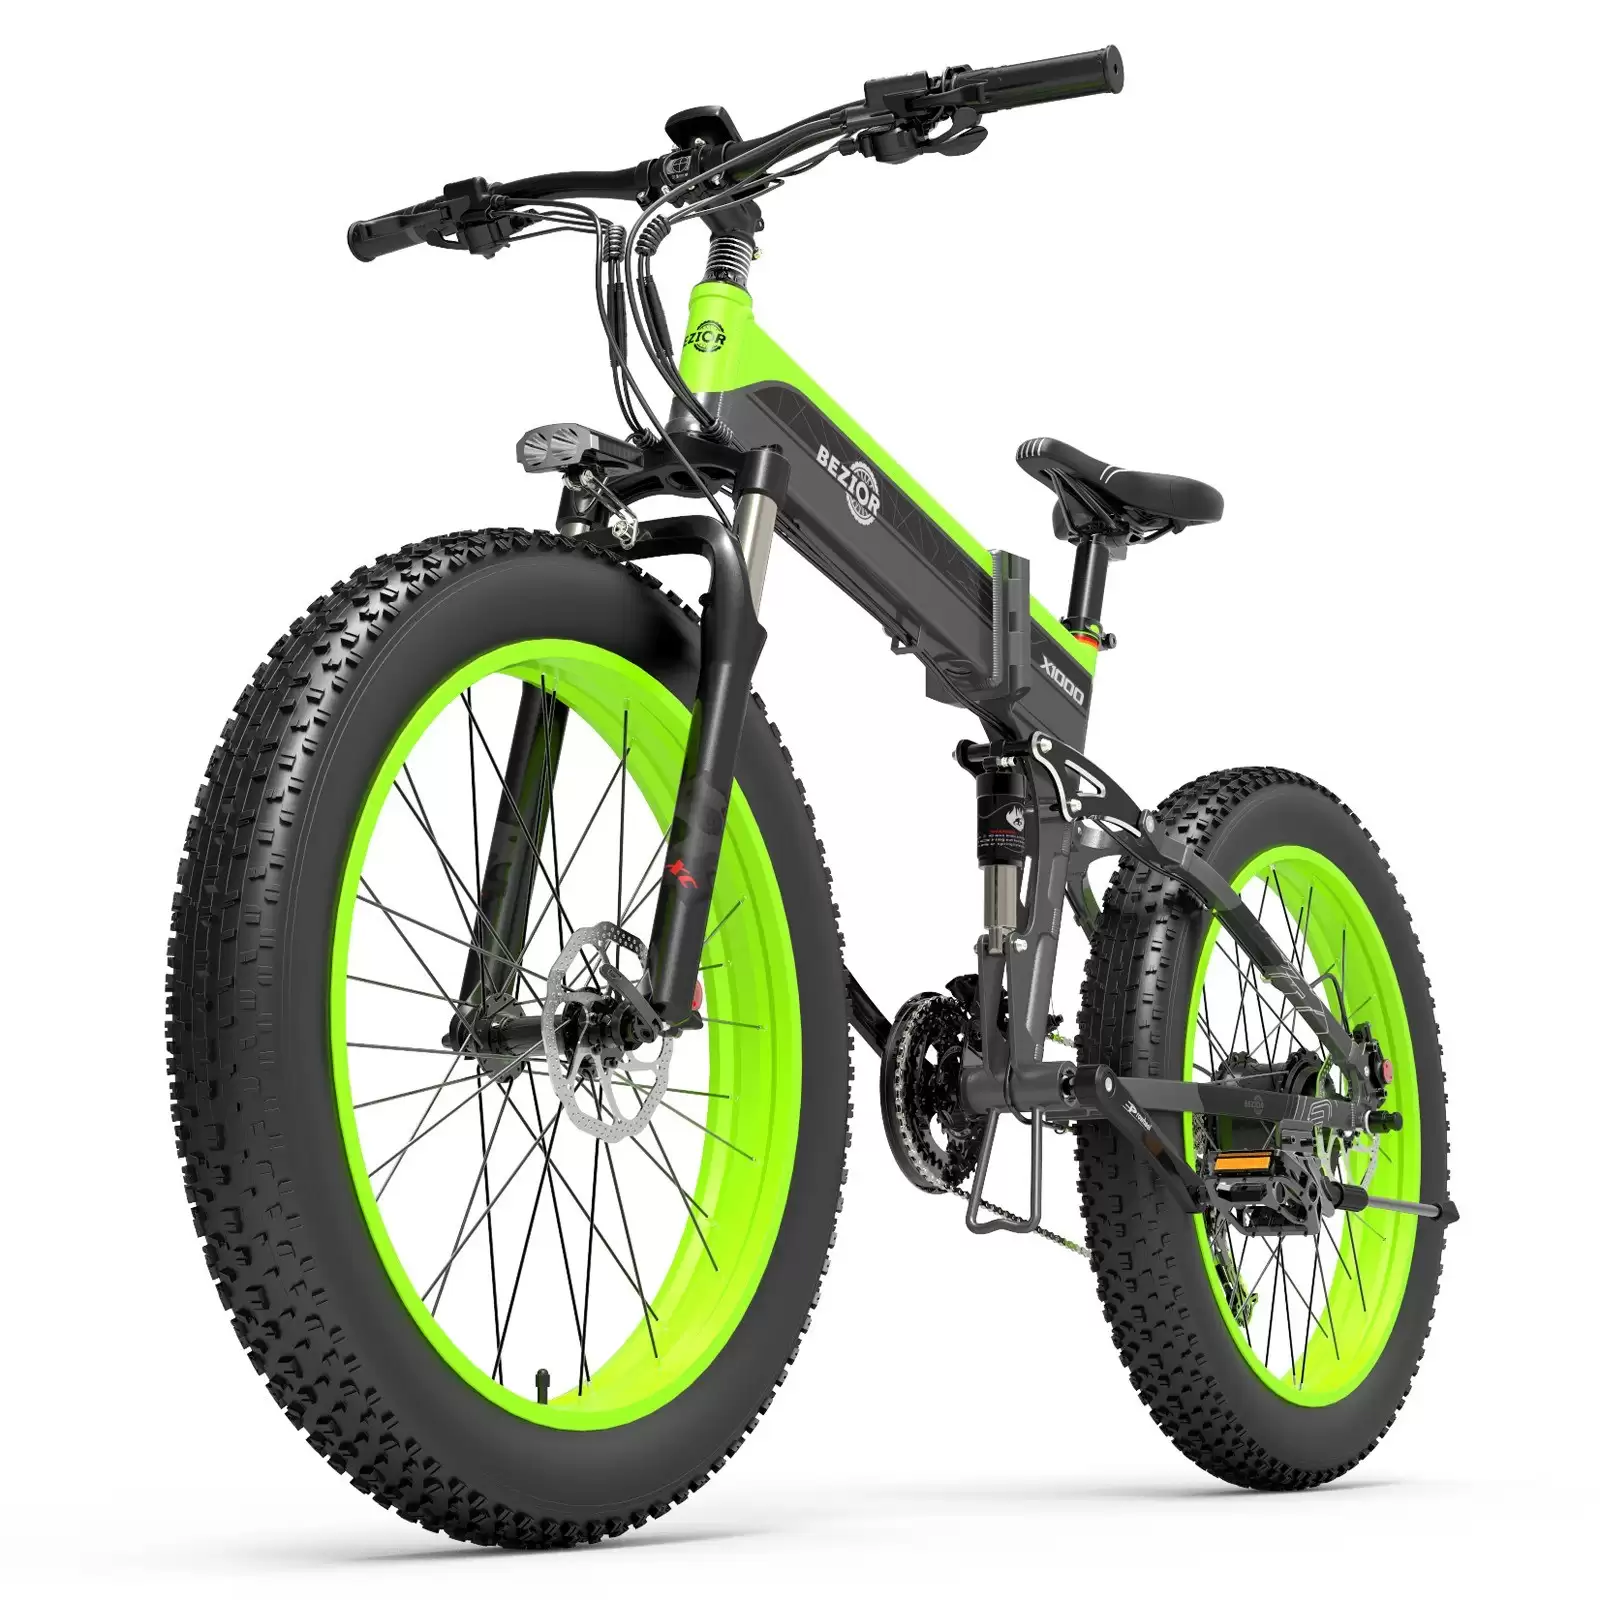 Order In Just $1128.96 Bezior X1000 Electric Bike 48v 1000w 12.8ah Battery Max Speed 40km/H With This Tomtop Discount Voucher